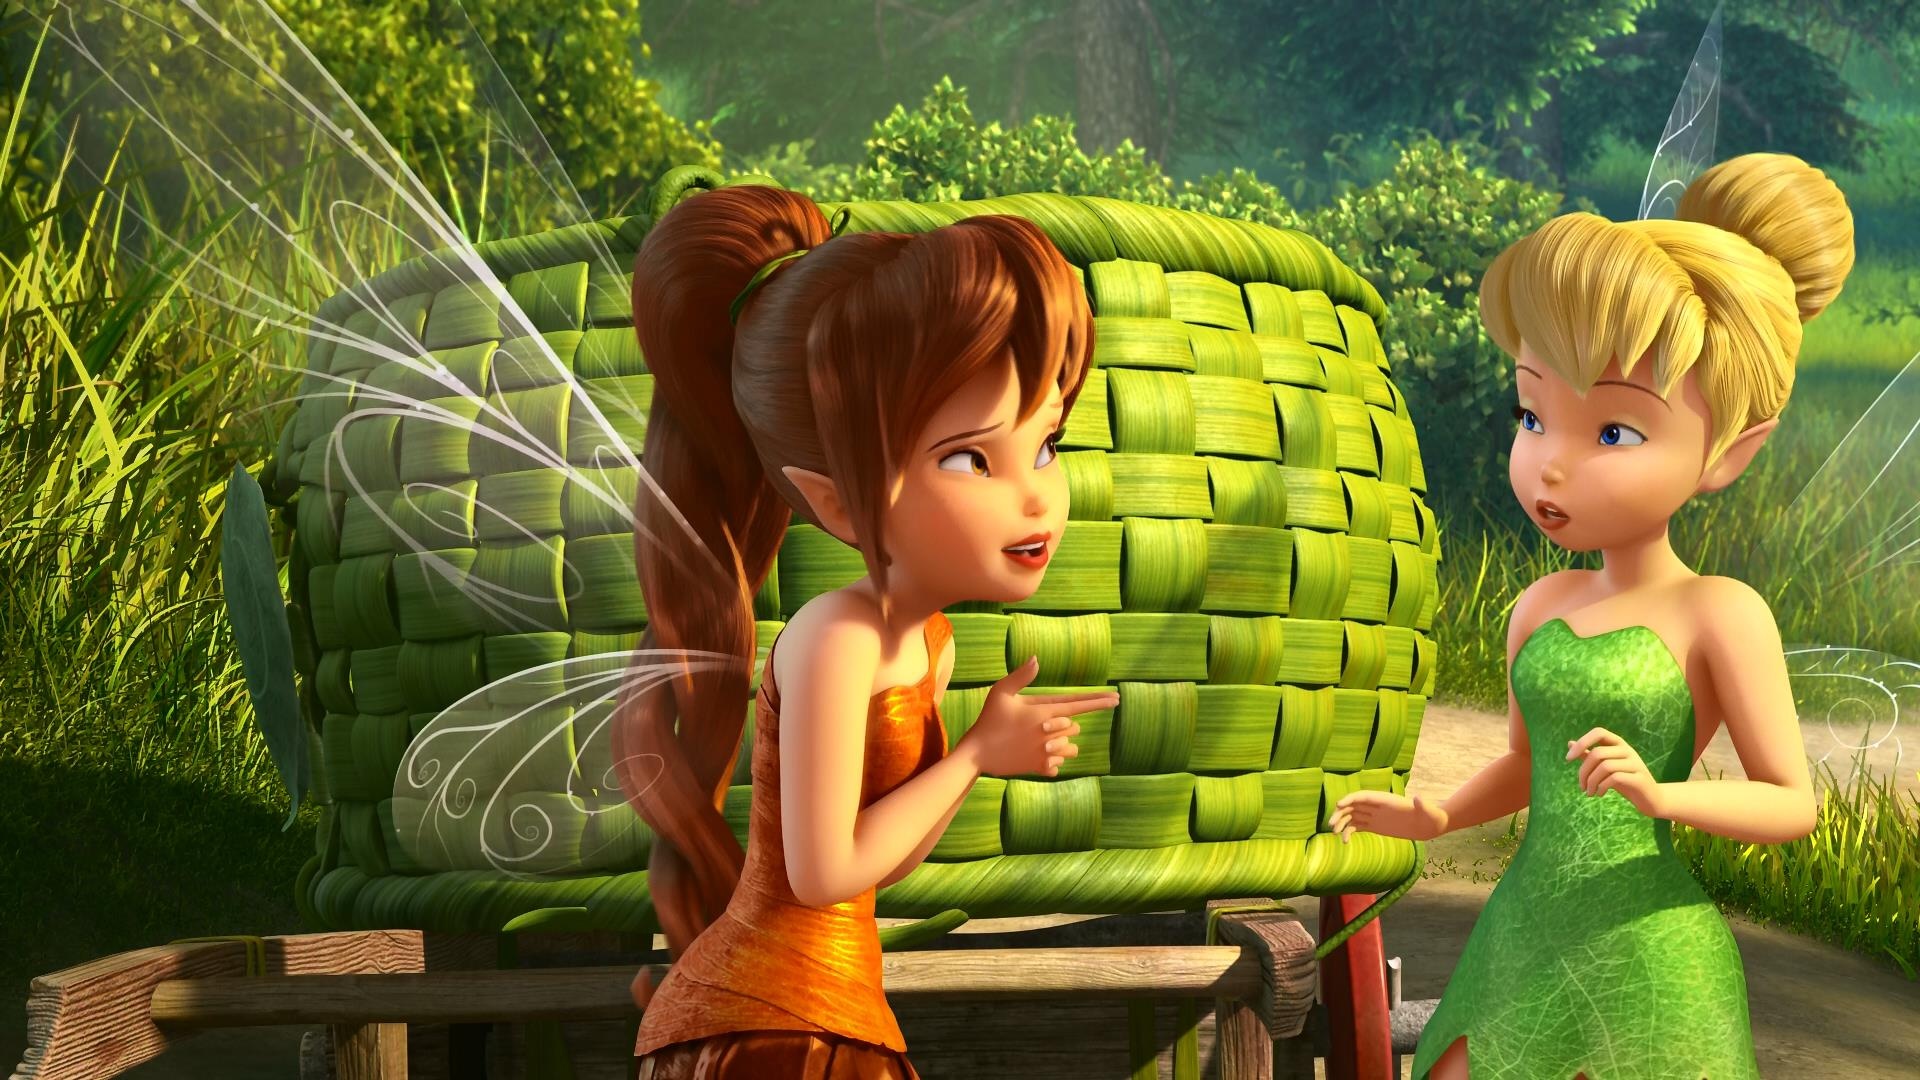 Tinker Bell, Magical wallpapers, Fairy tales, Animation, 1920x1080 Full HD Desktop